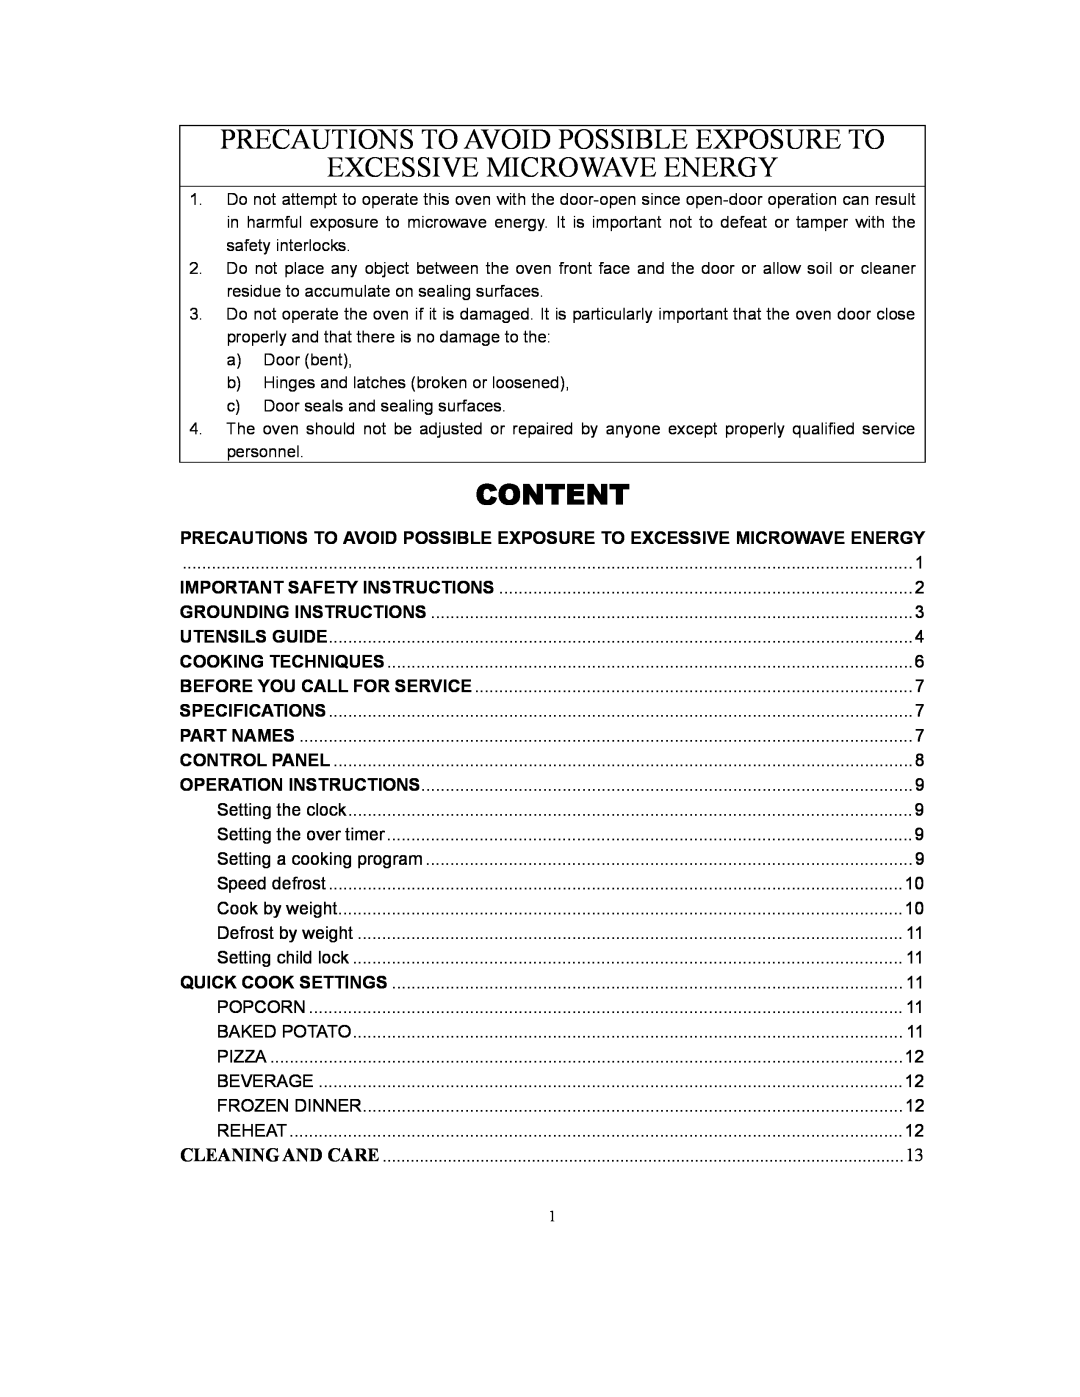 Kenmore 87039 owner manual Content, Precautions To Avoid Possible Exposure To, Excessive Microwave Energy 